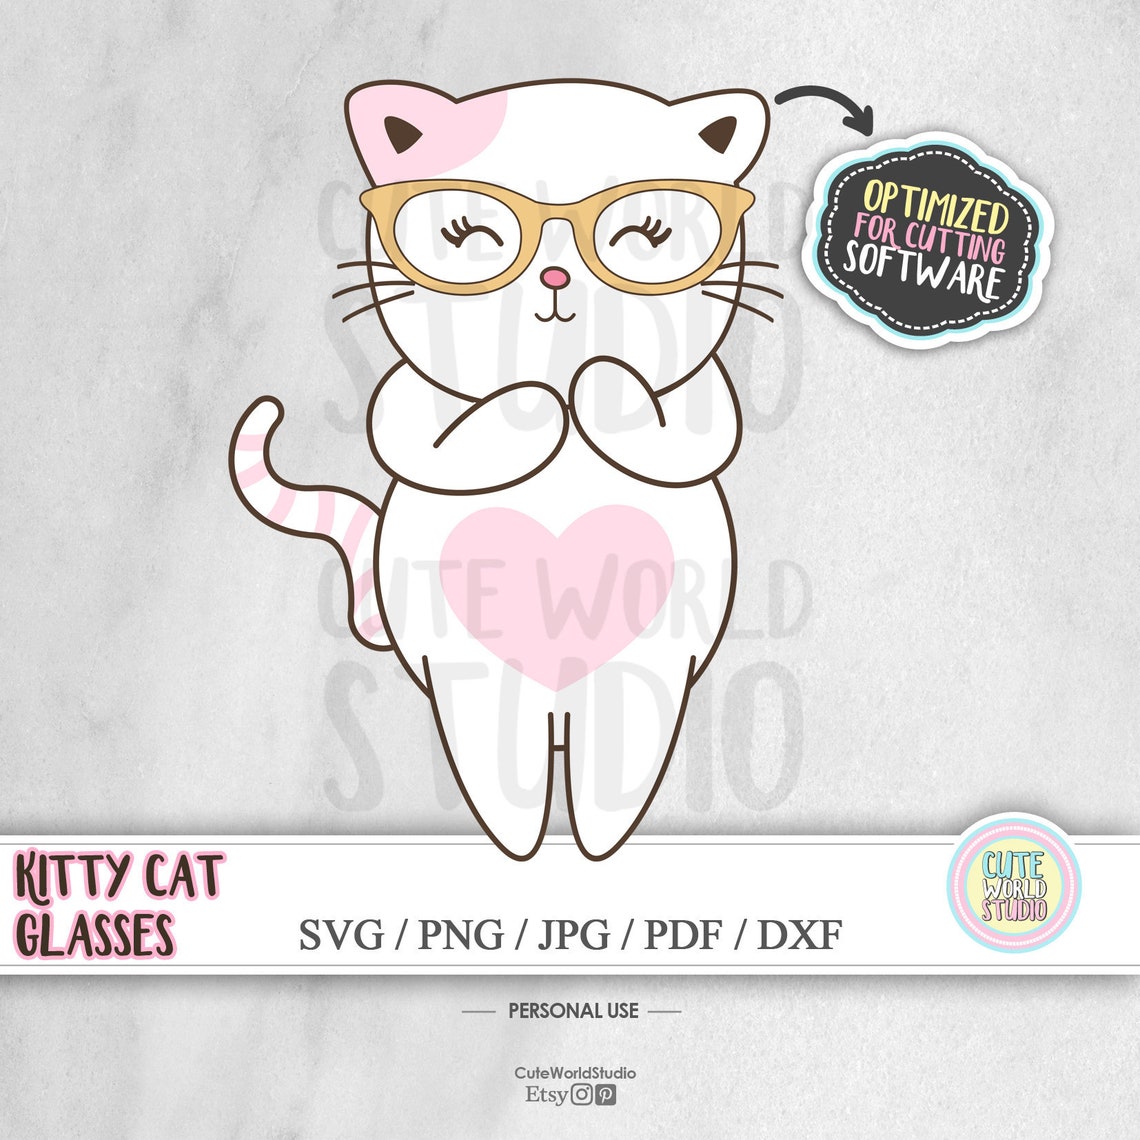 Kitty Cat Glasses SVG Clipart / Instant Download - Etsy